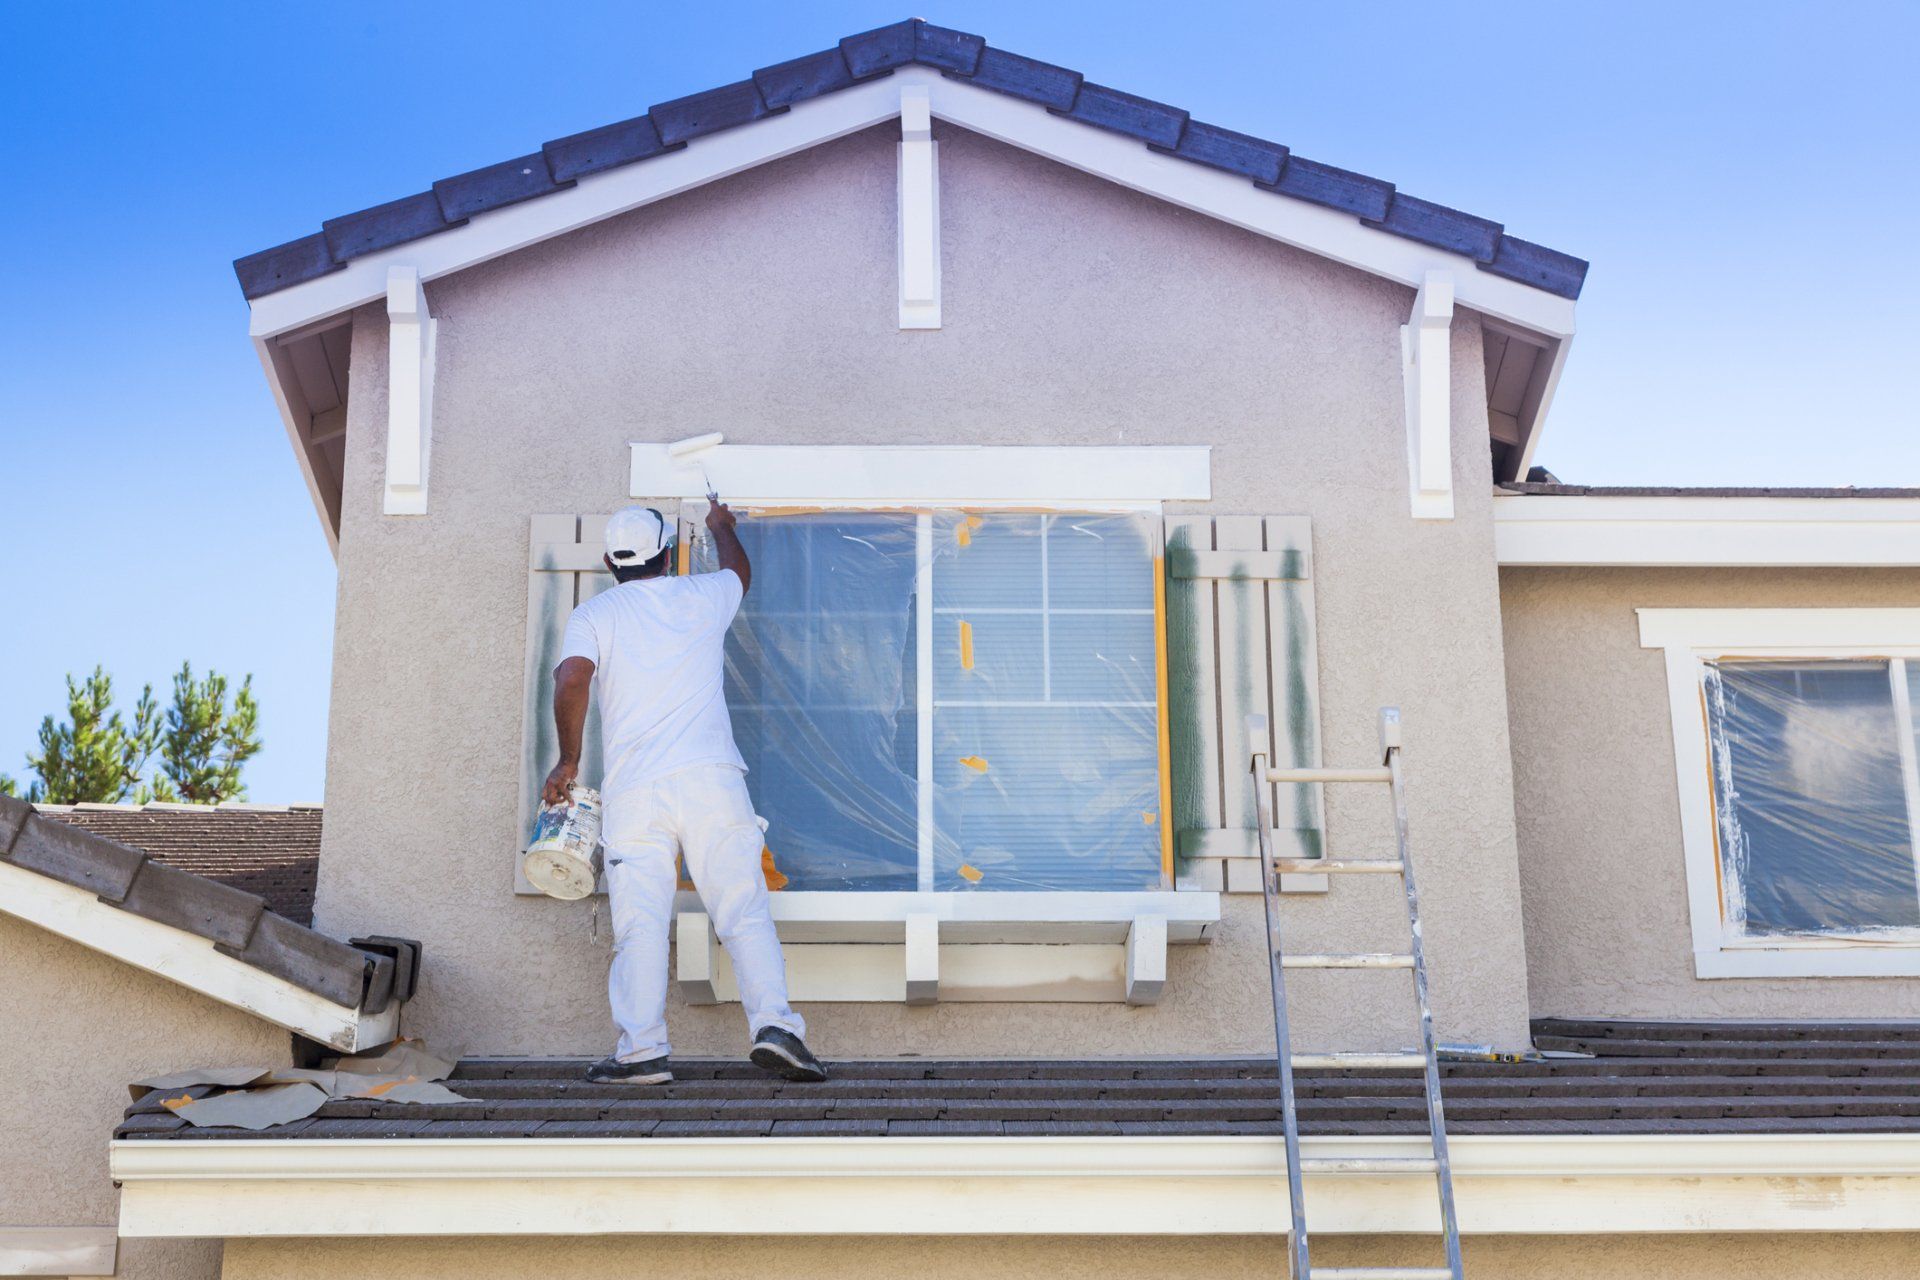 Painter painting exterior - Keith's Construction & Painting Co., Inc. in Anaheim, CA